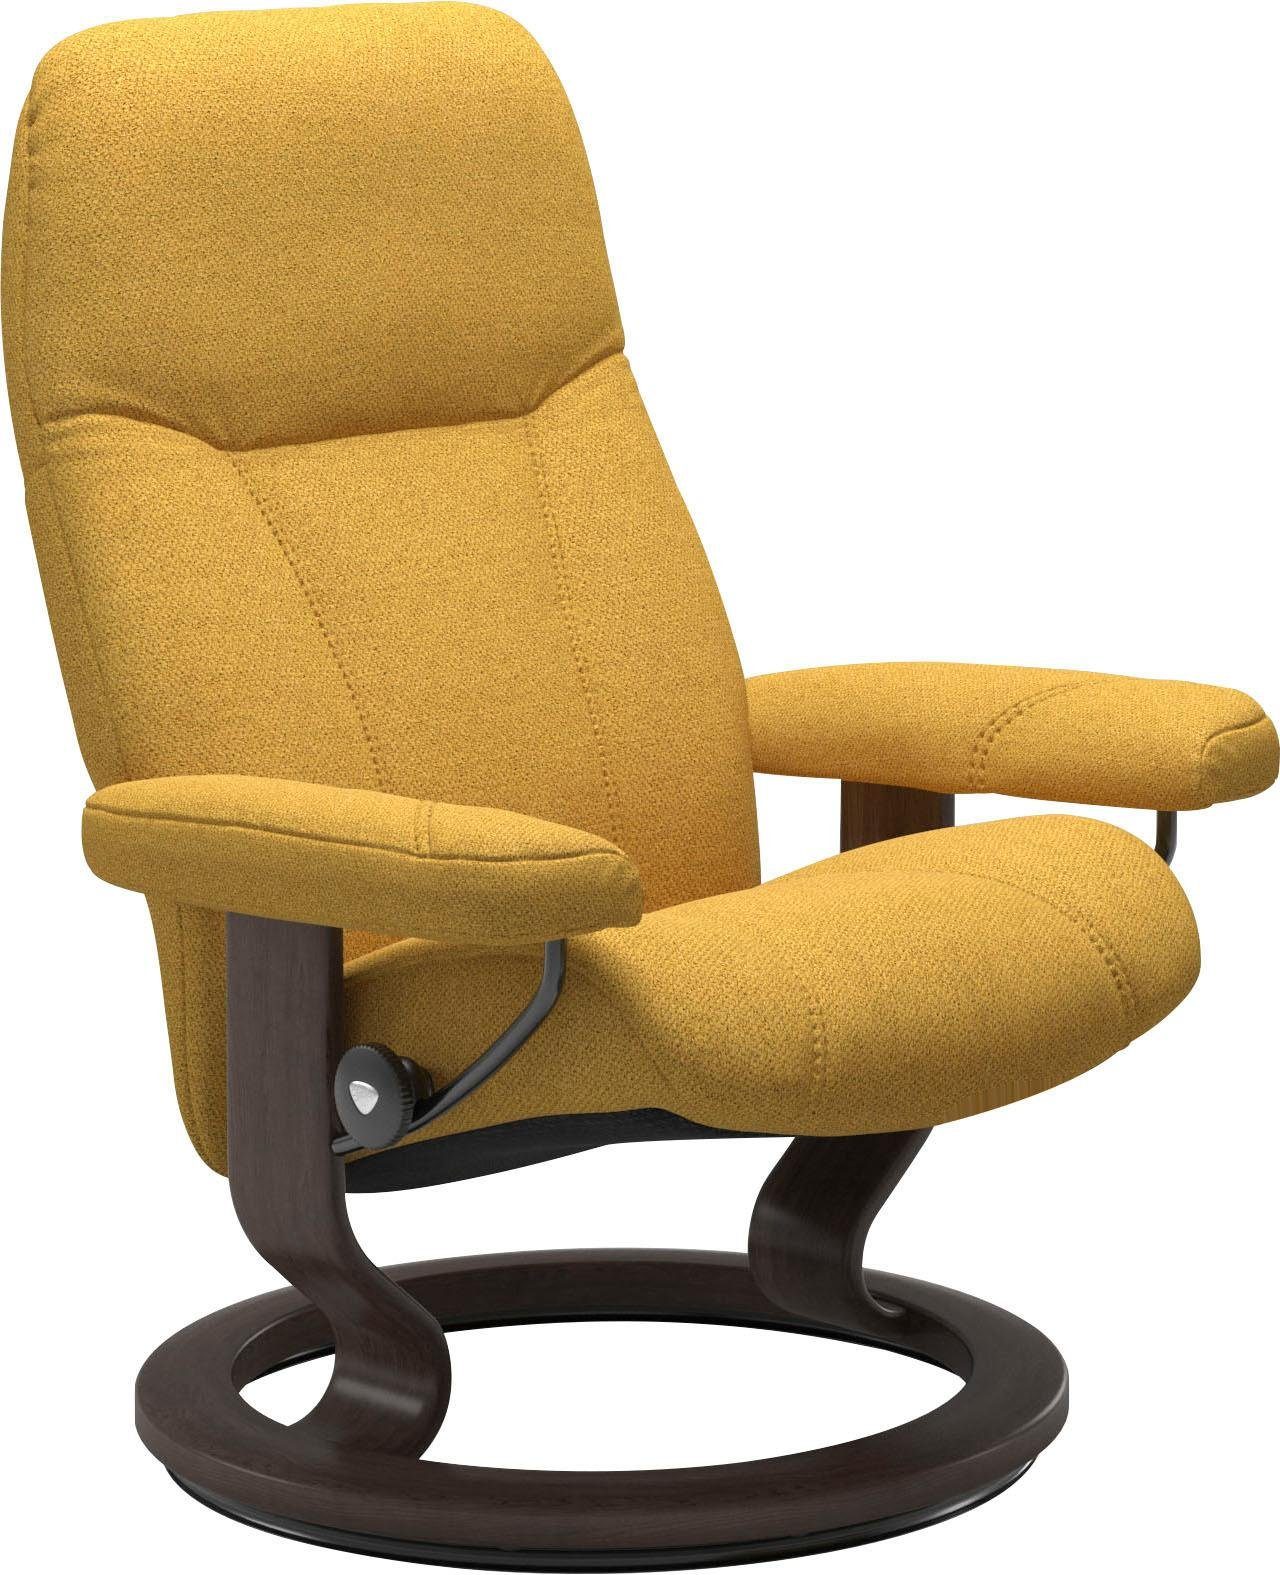 Relaxsessel Base, Gestell Wenge M, Größe Stressless® mit Consul, Classic